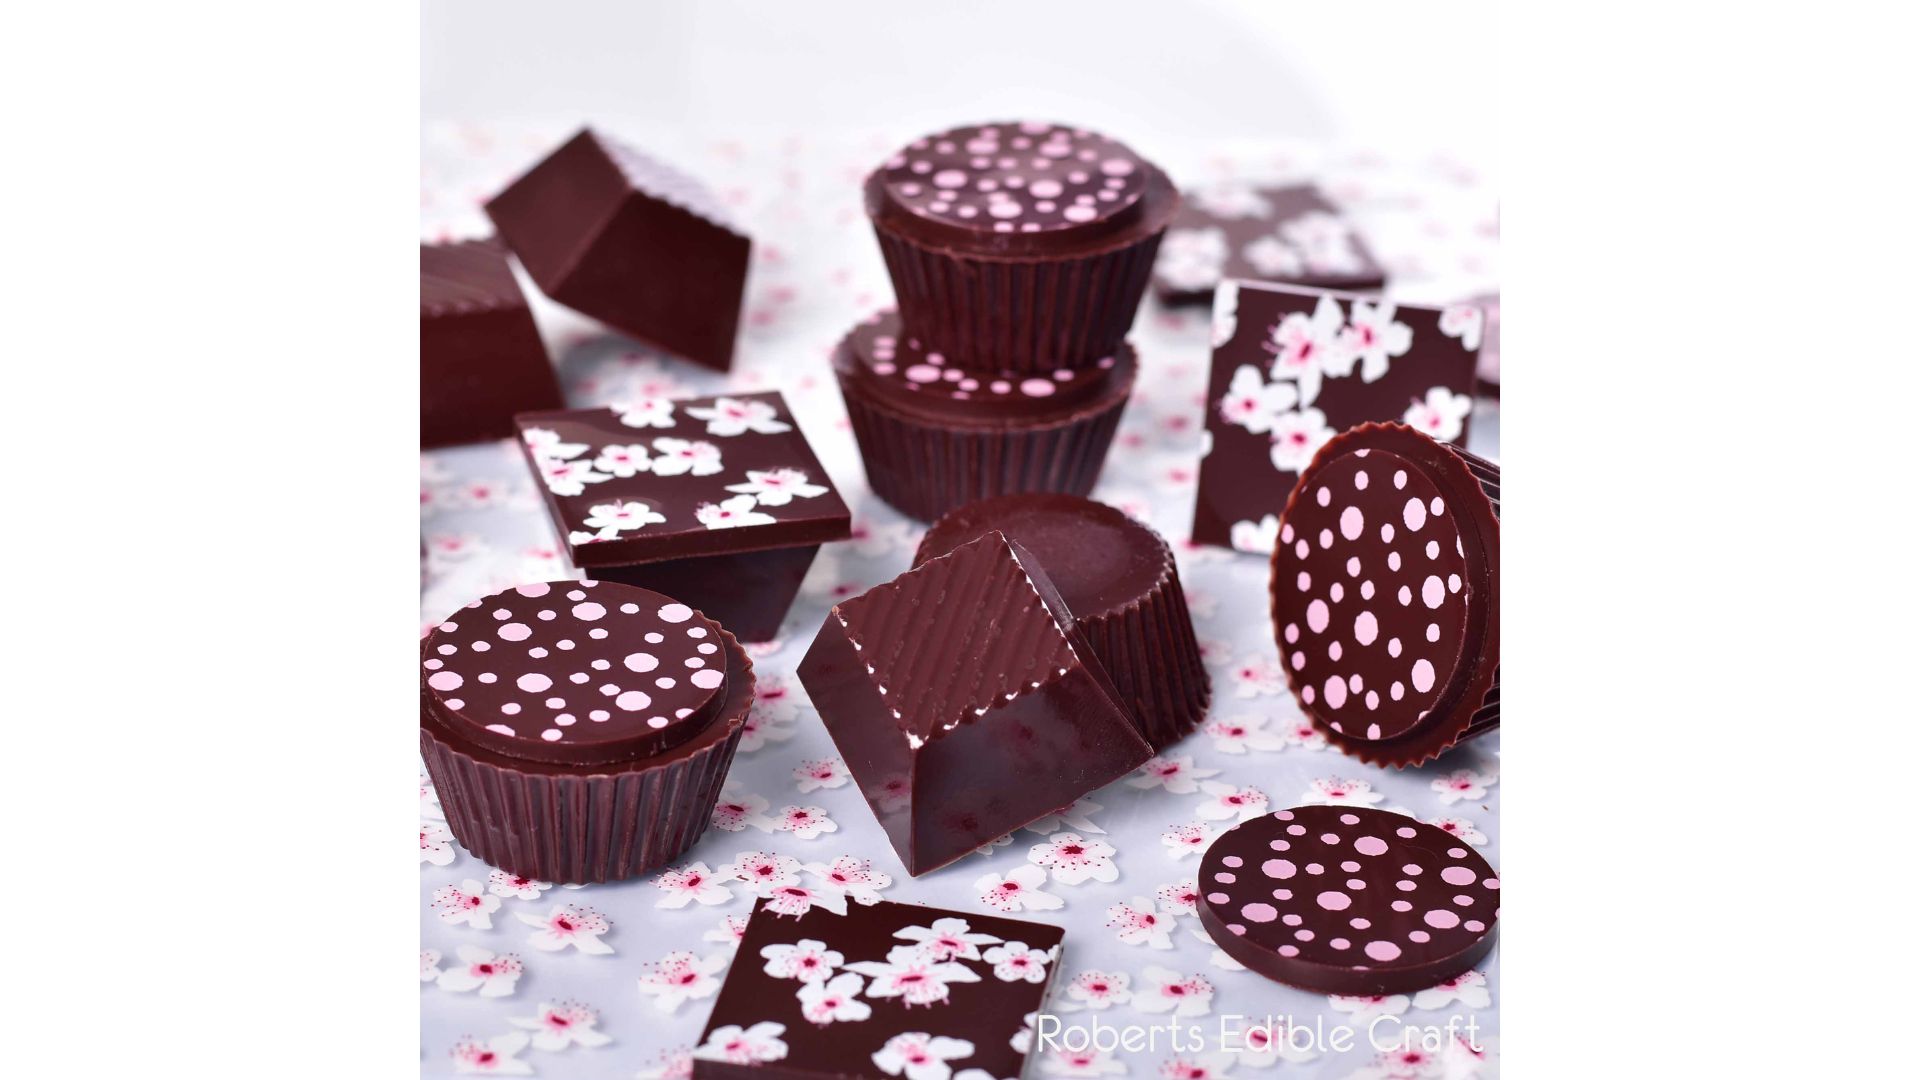 Chocolate Making Supplies Buying Guide